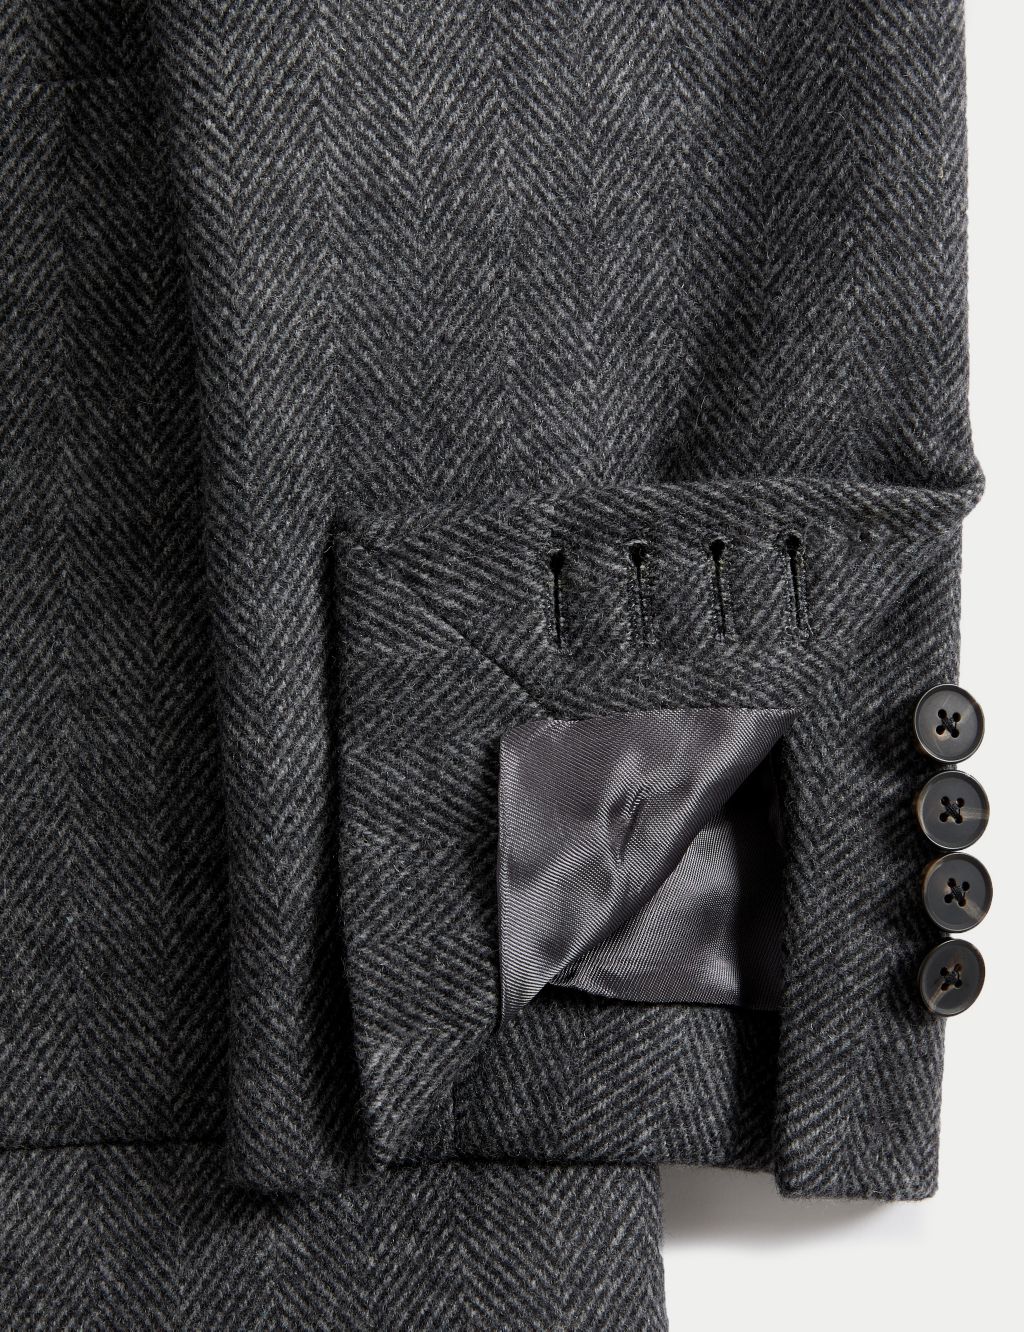 Tailored Fit Wool Rich Suit Jacket image 6